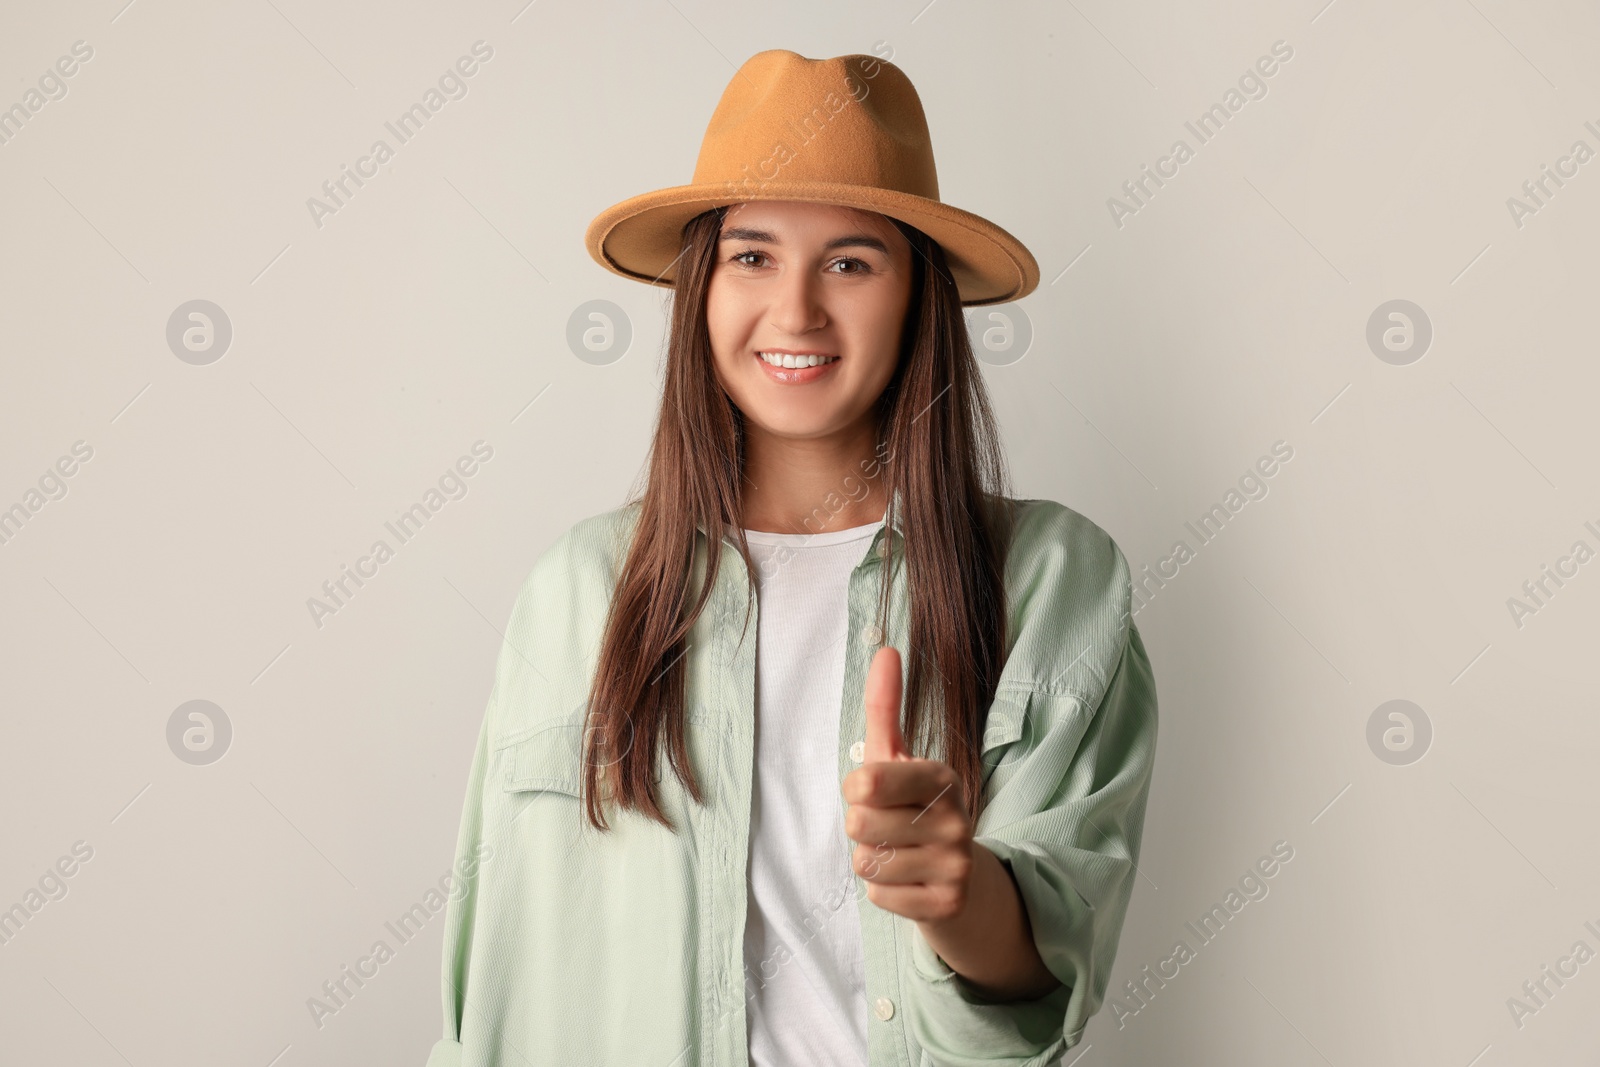 Photo of Smiling young woman showing thumb up gesture in stylish outfit on light background